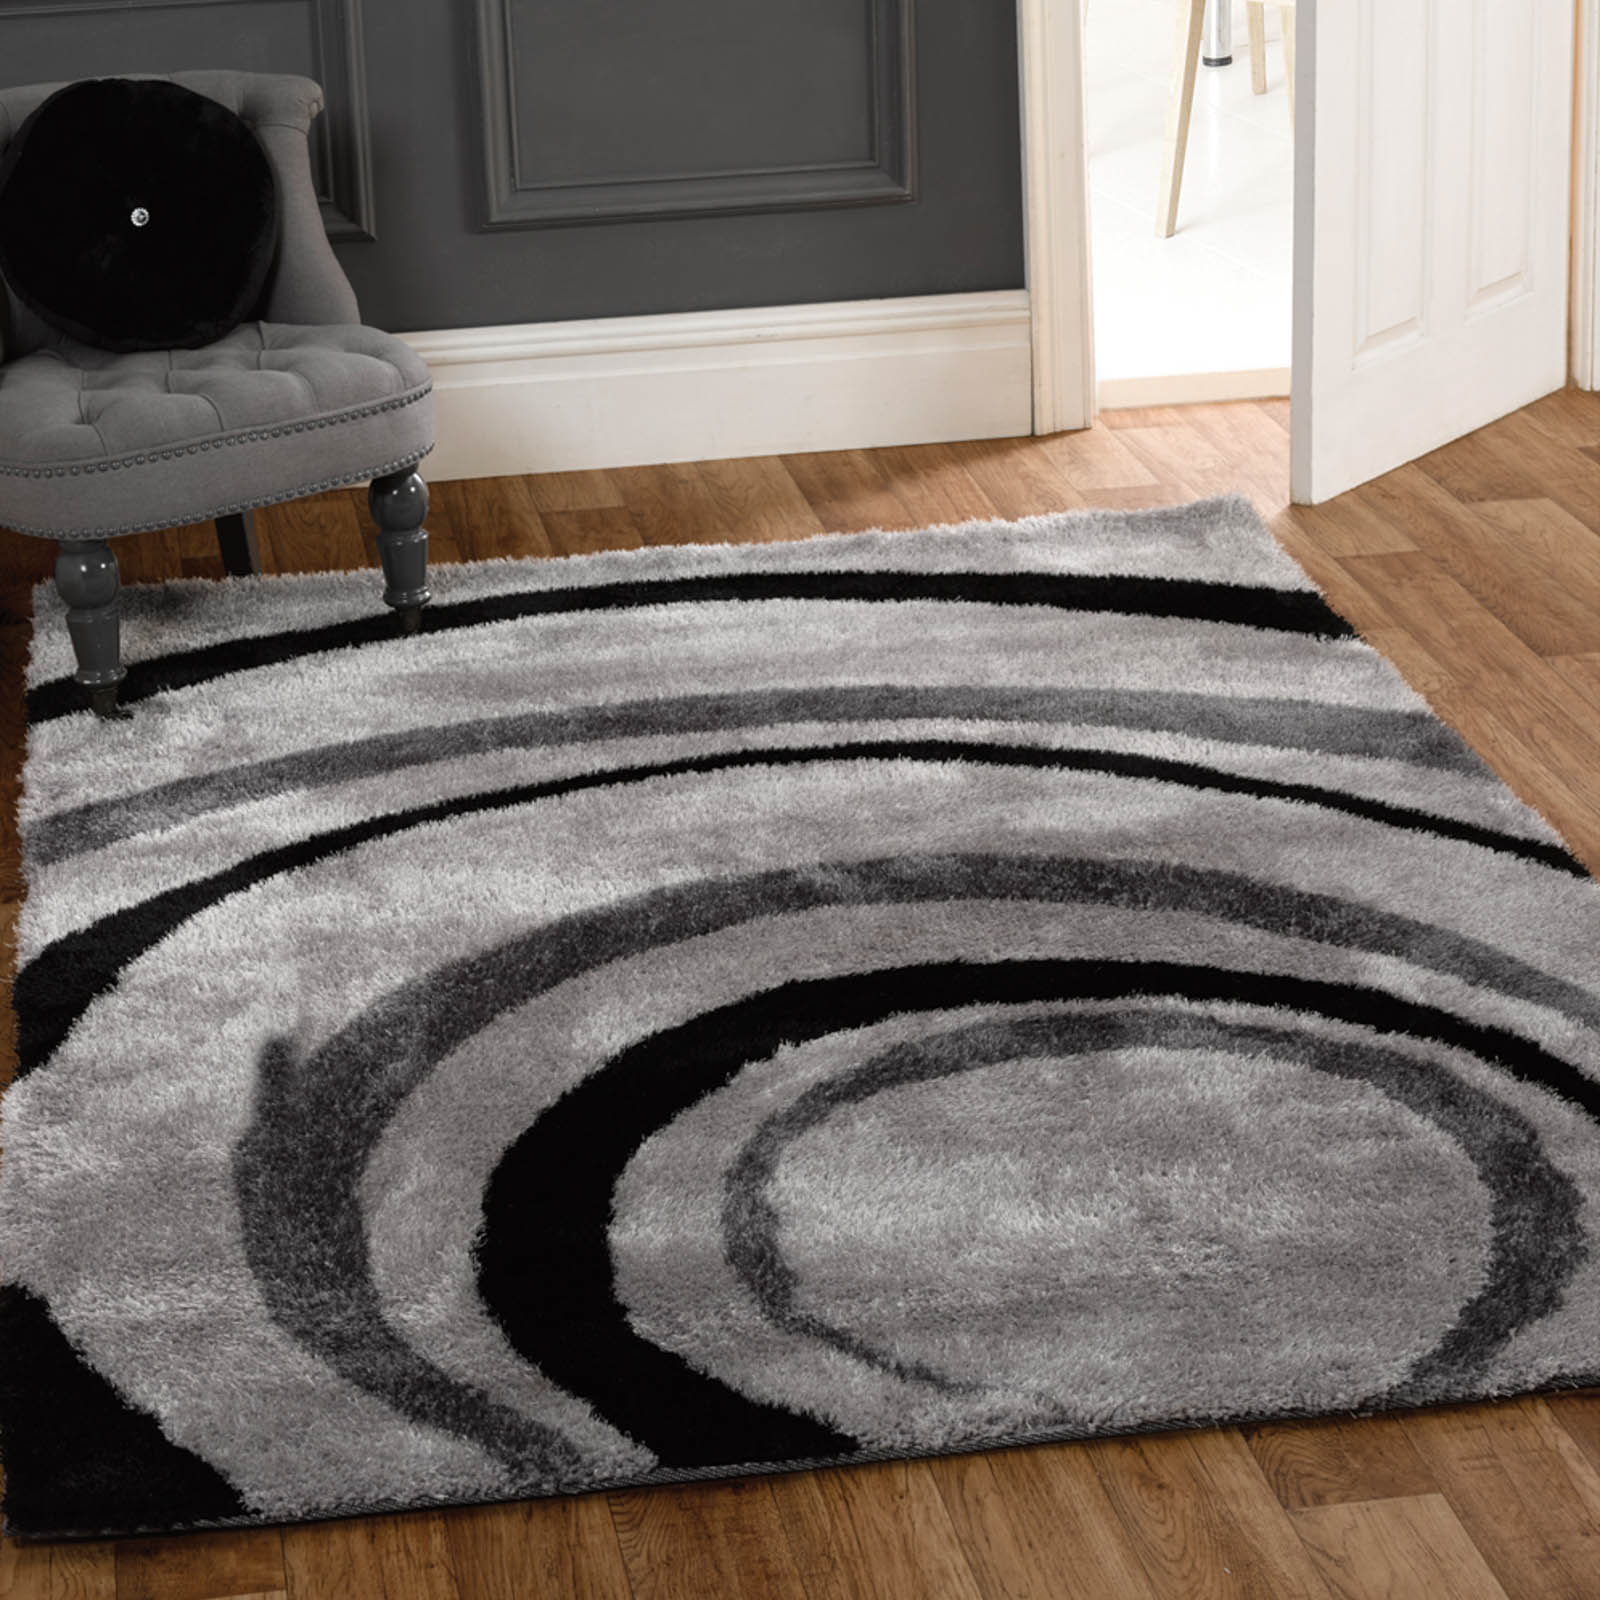 grey rugs grande vista droplet rugs in black and grey MZEQQWT